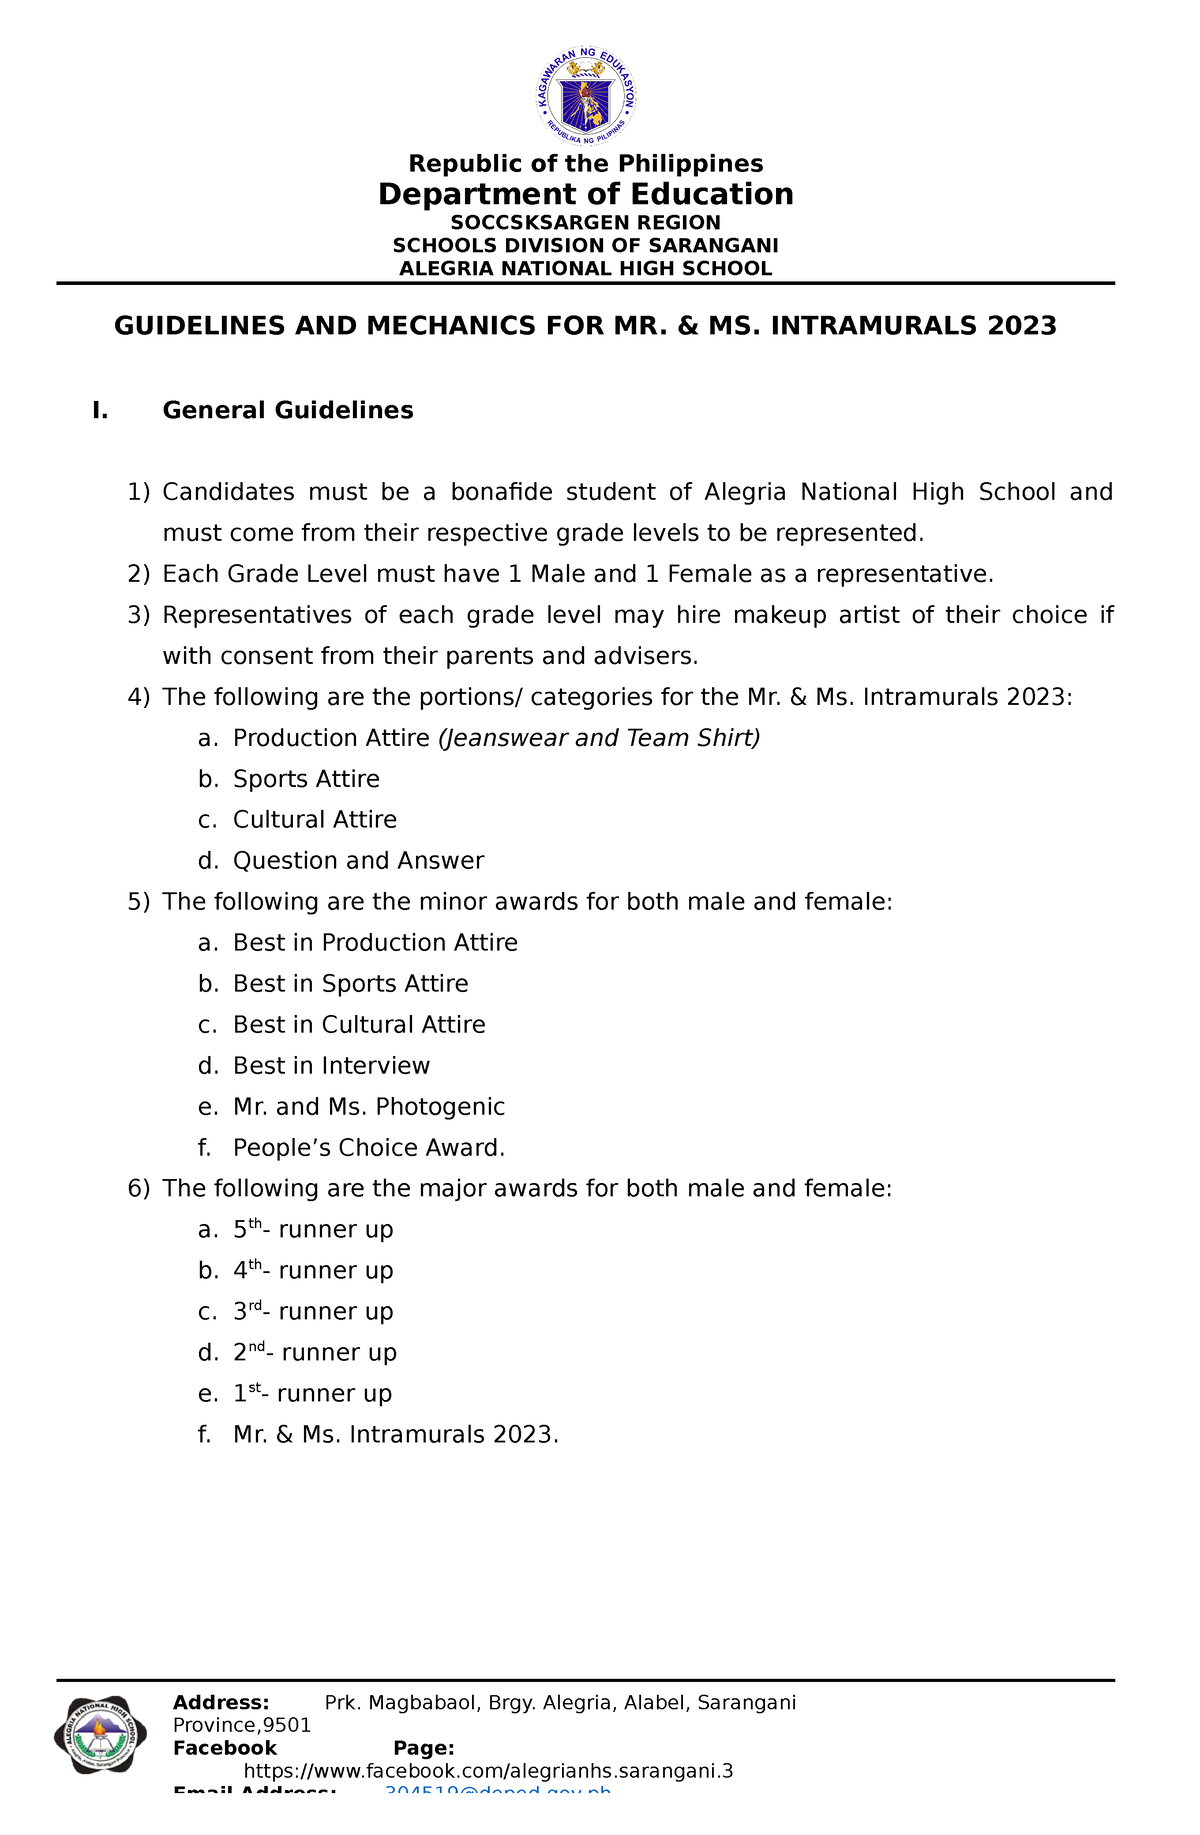 guidelines-and-mechanics-for-mr-ms-intrams-2023-republic-of-the